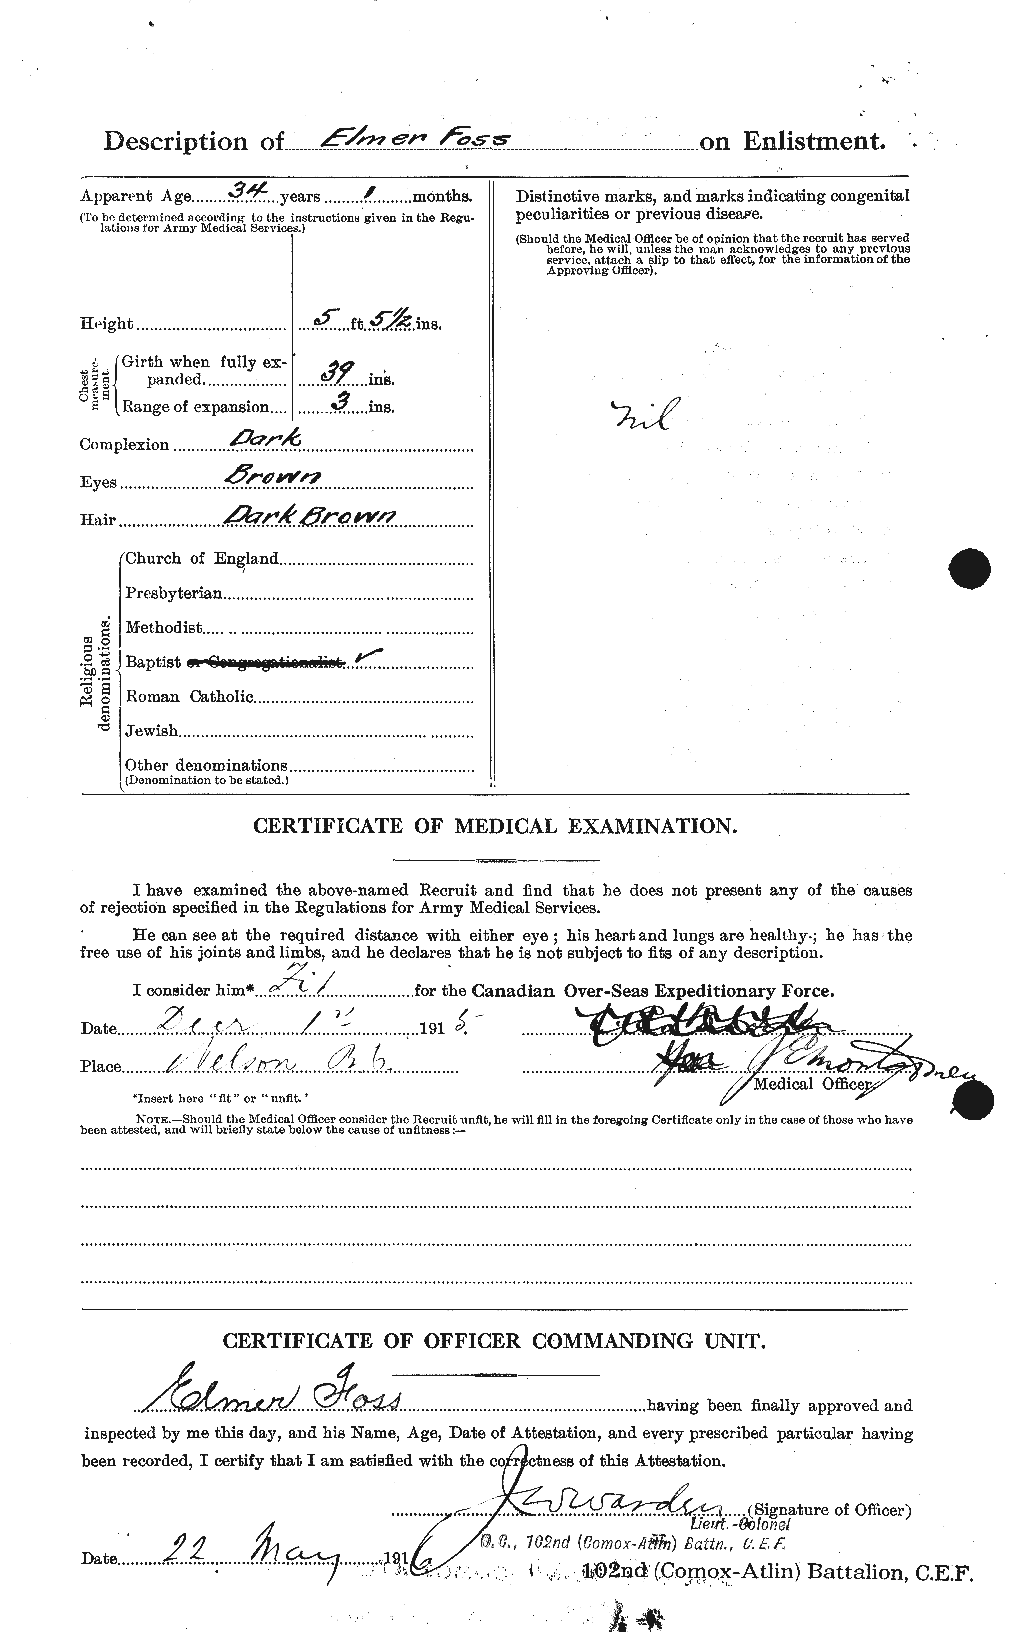 Personnel Records of the First World War - CEF 330388b